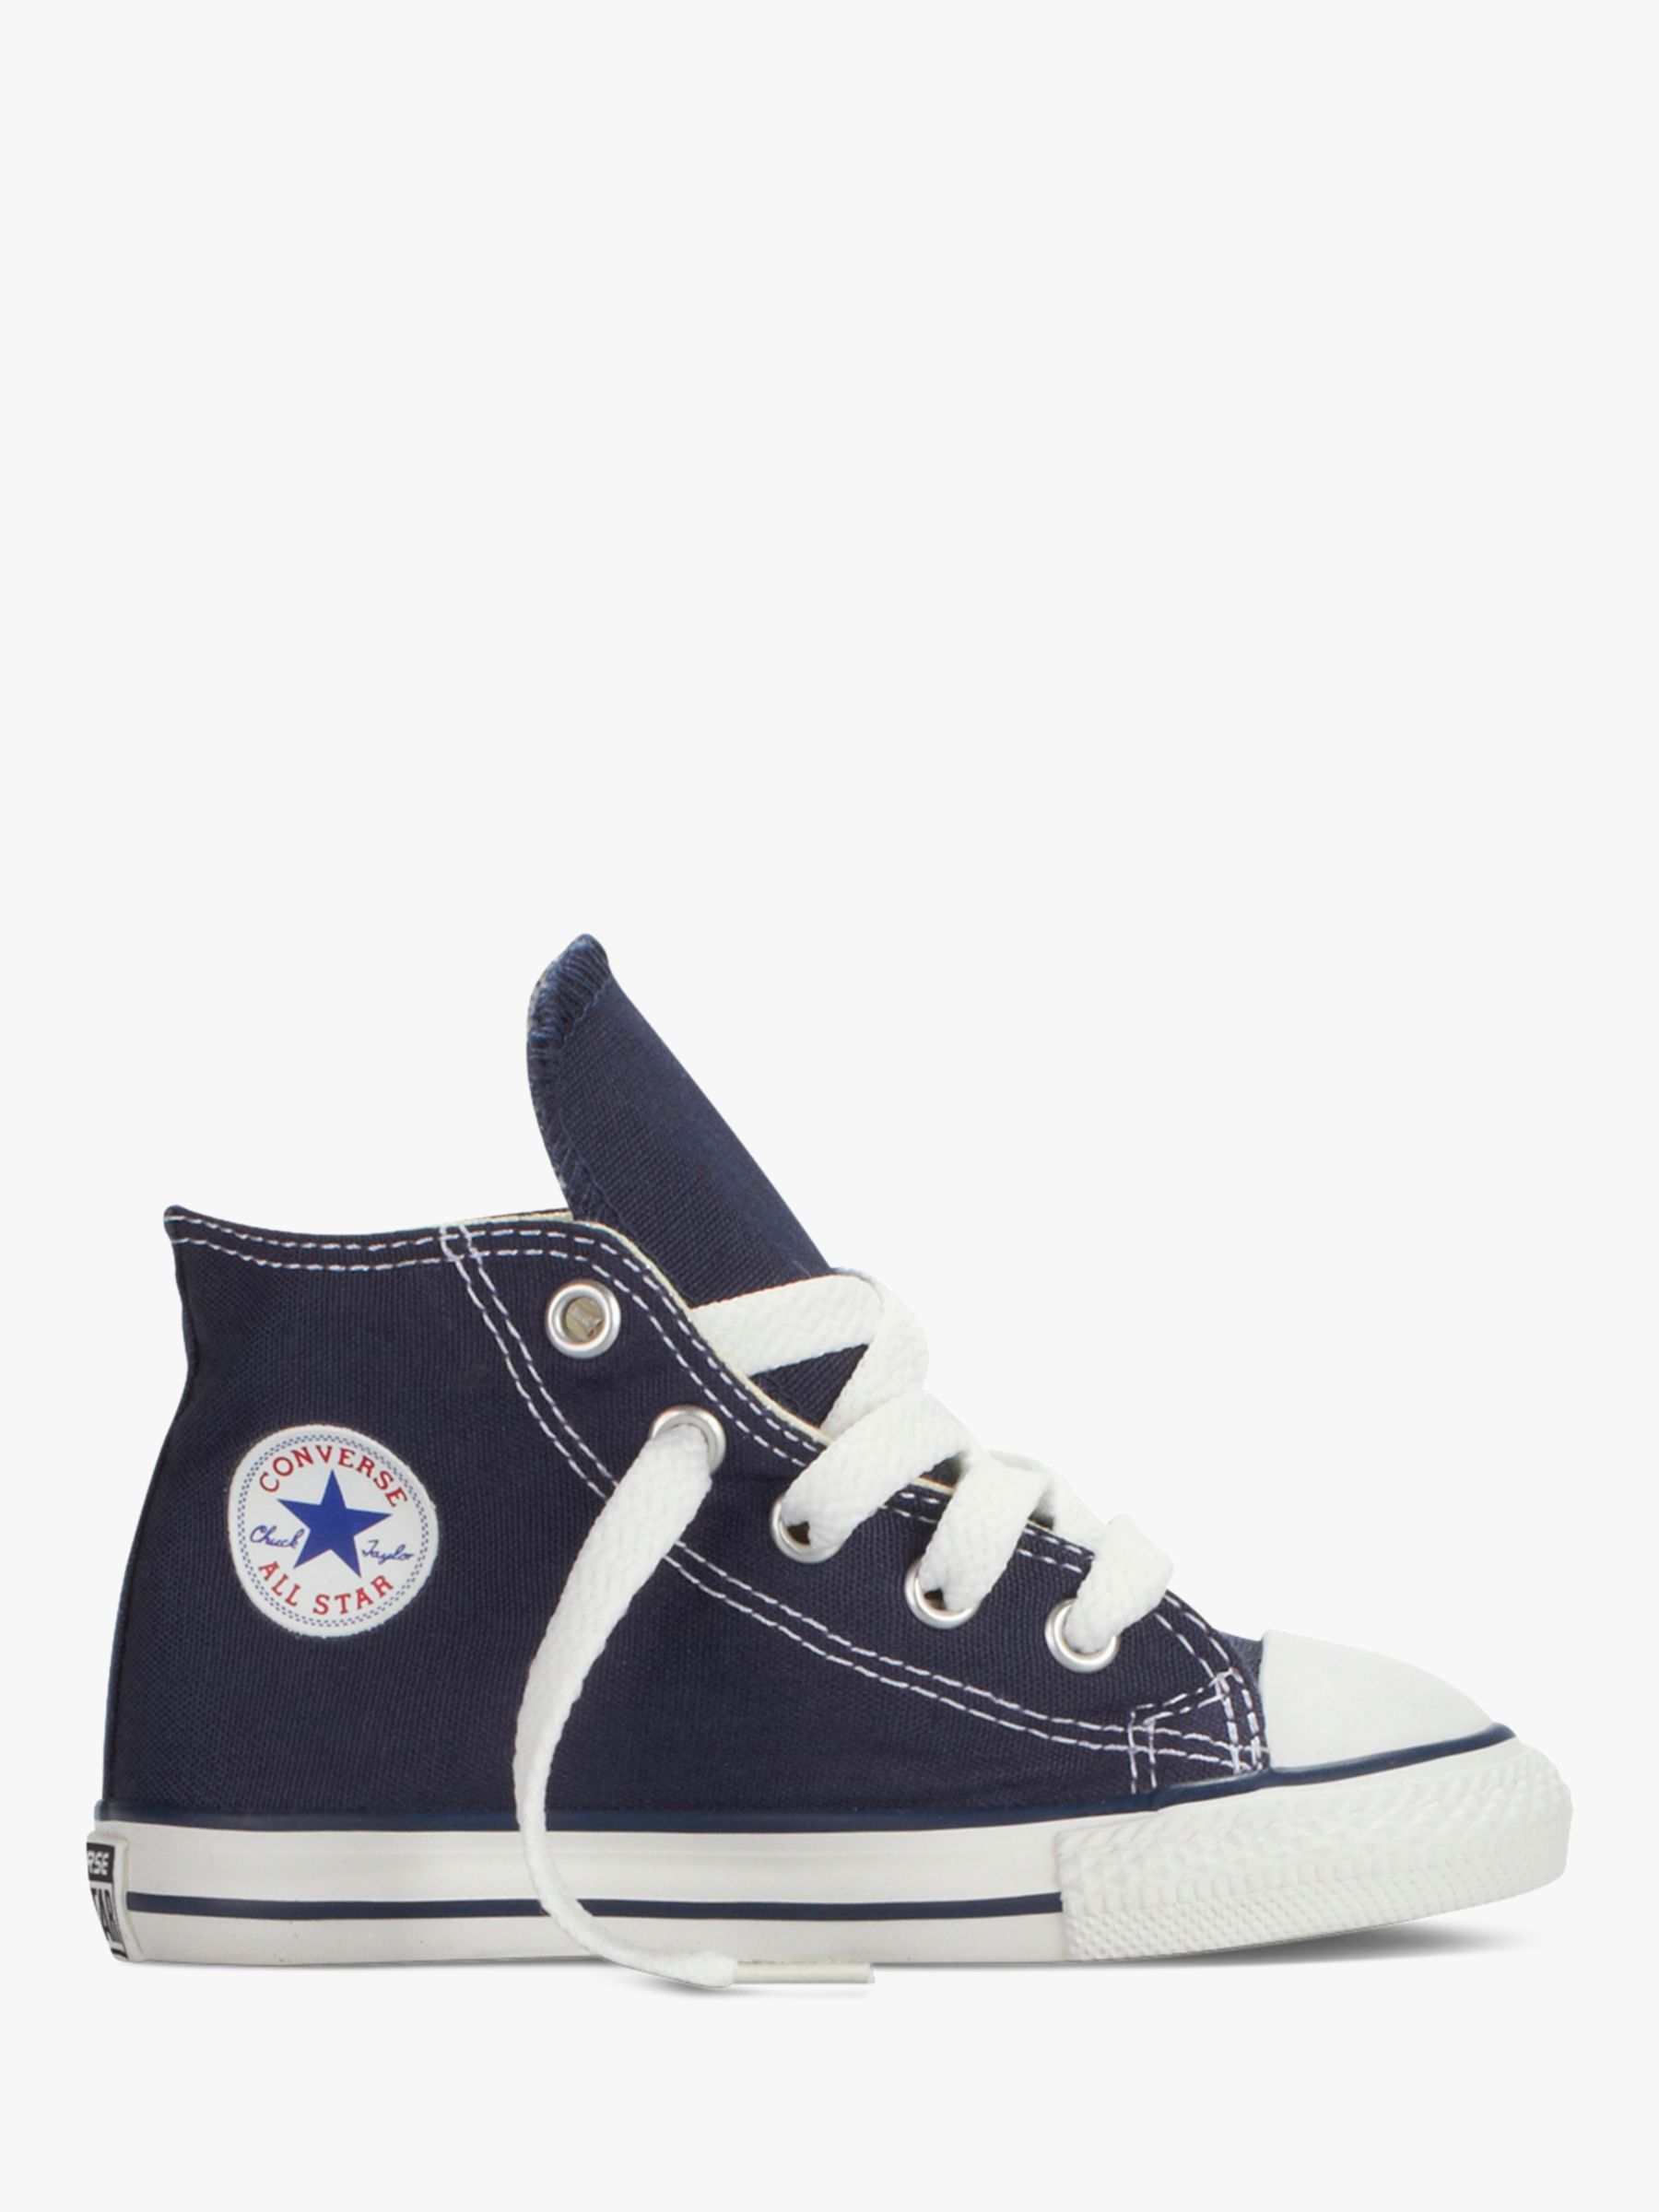 Converse All Star Core-Hi Trainers, Navy, Size 10 Junior